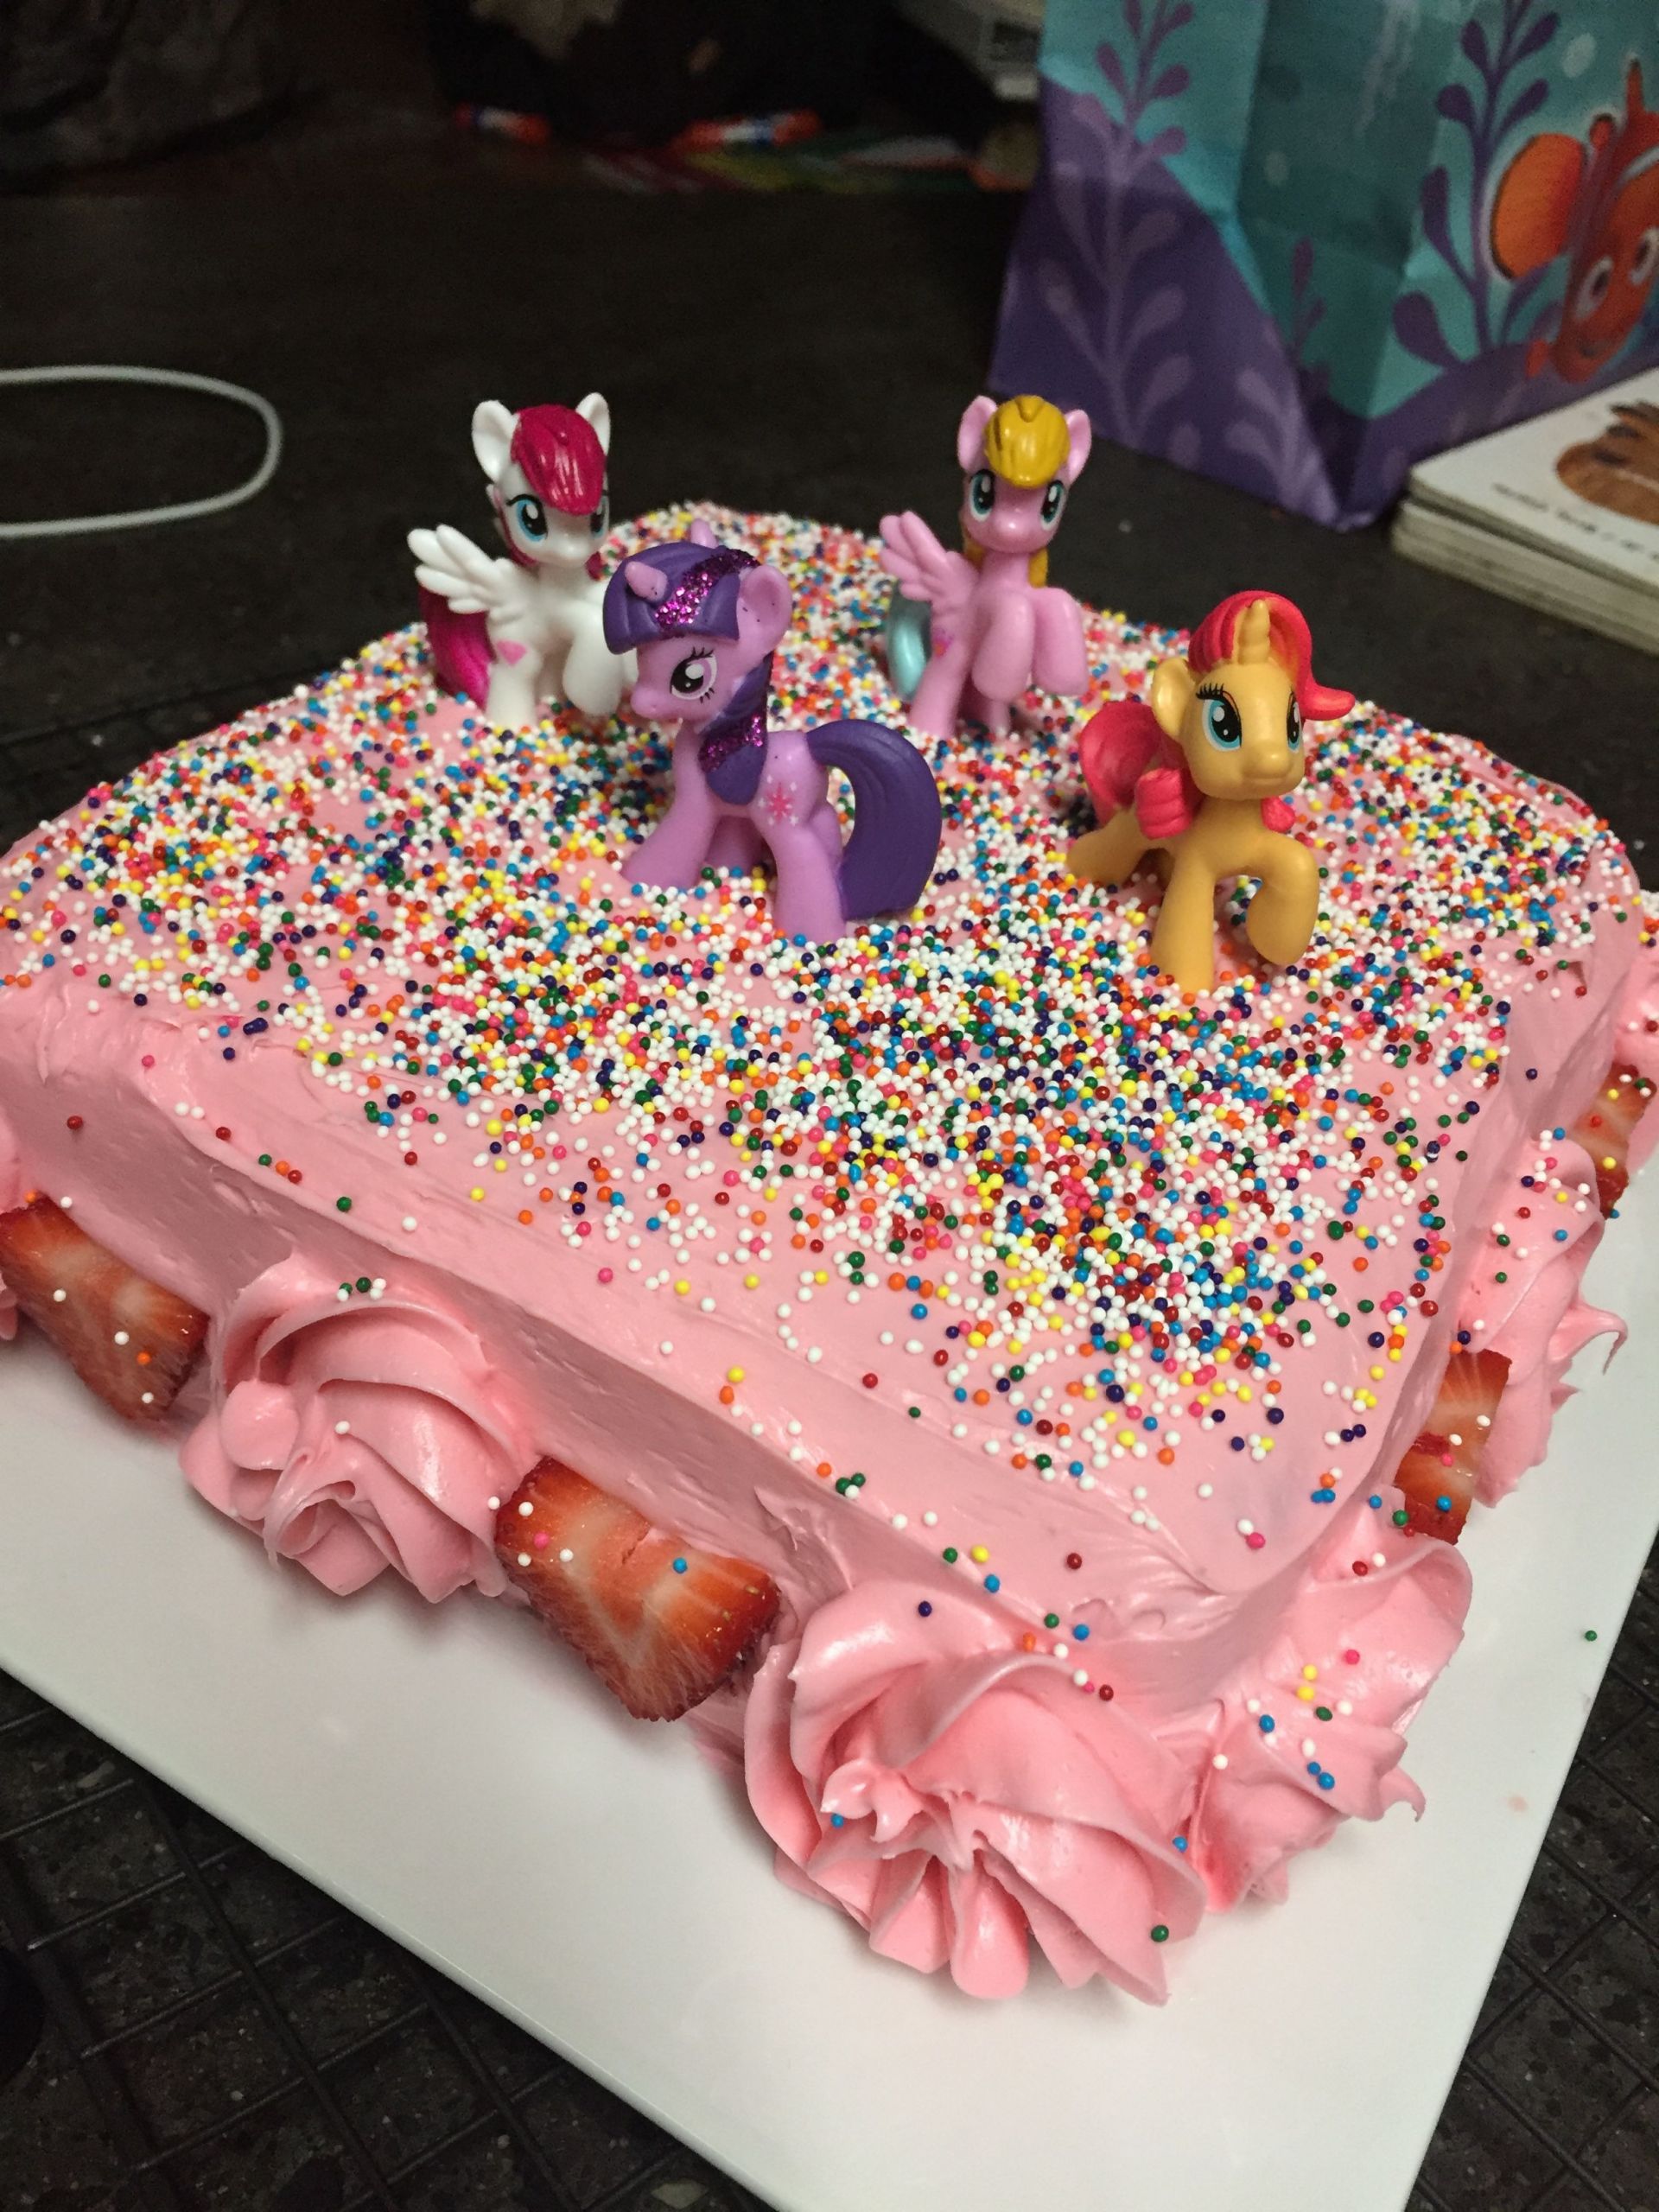 Birthday Party Ideas For 4 Year Girl
 Strawberry My Little Pony birthday cake for 4 year old